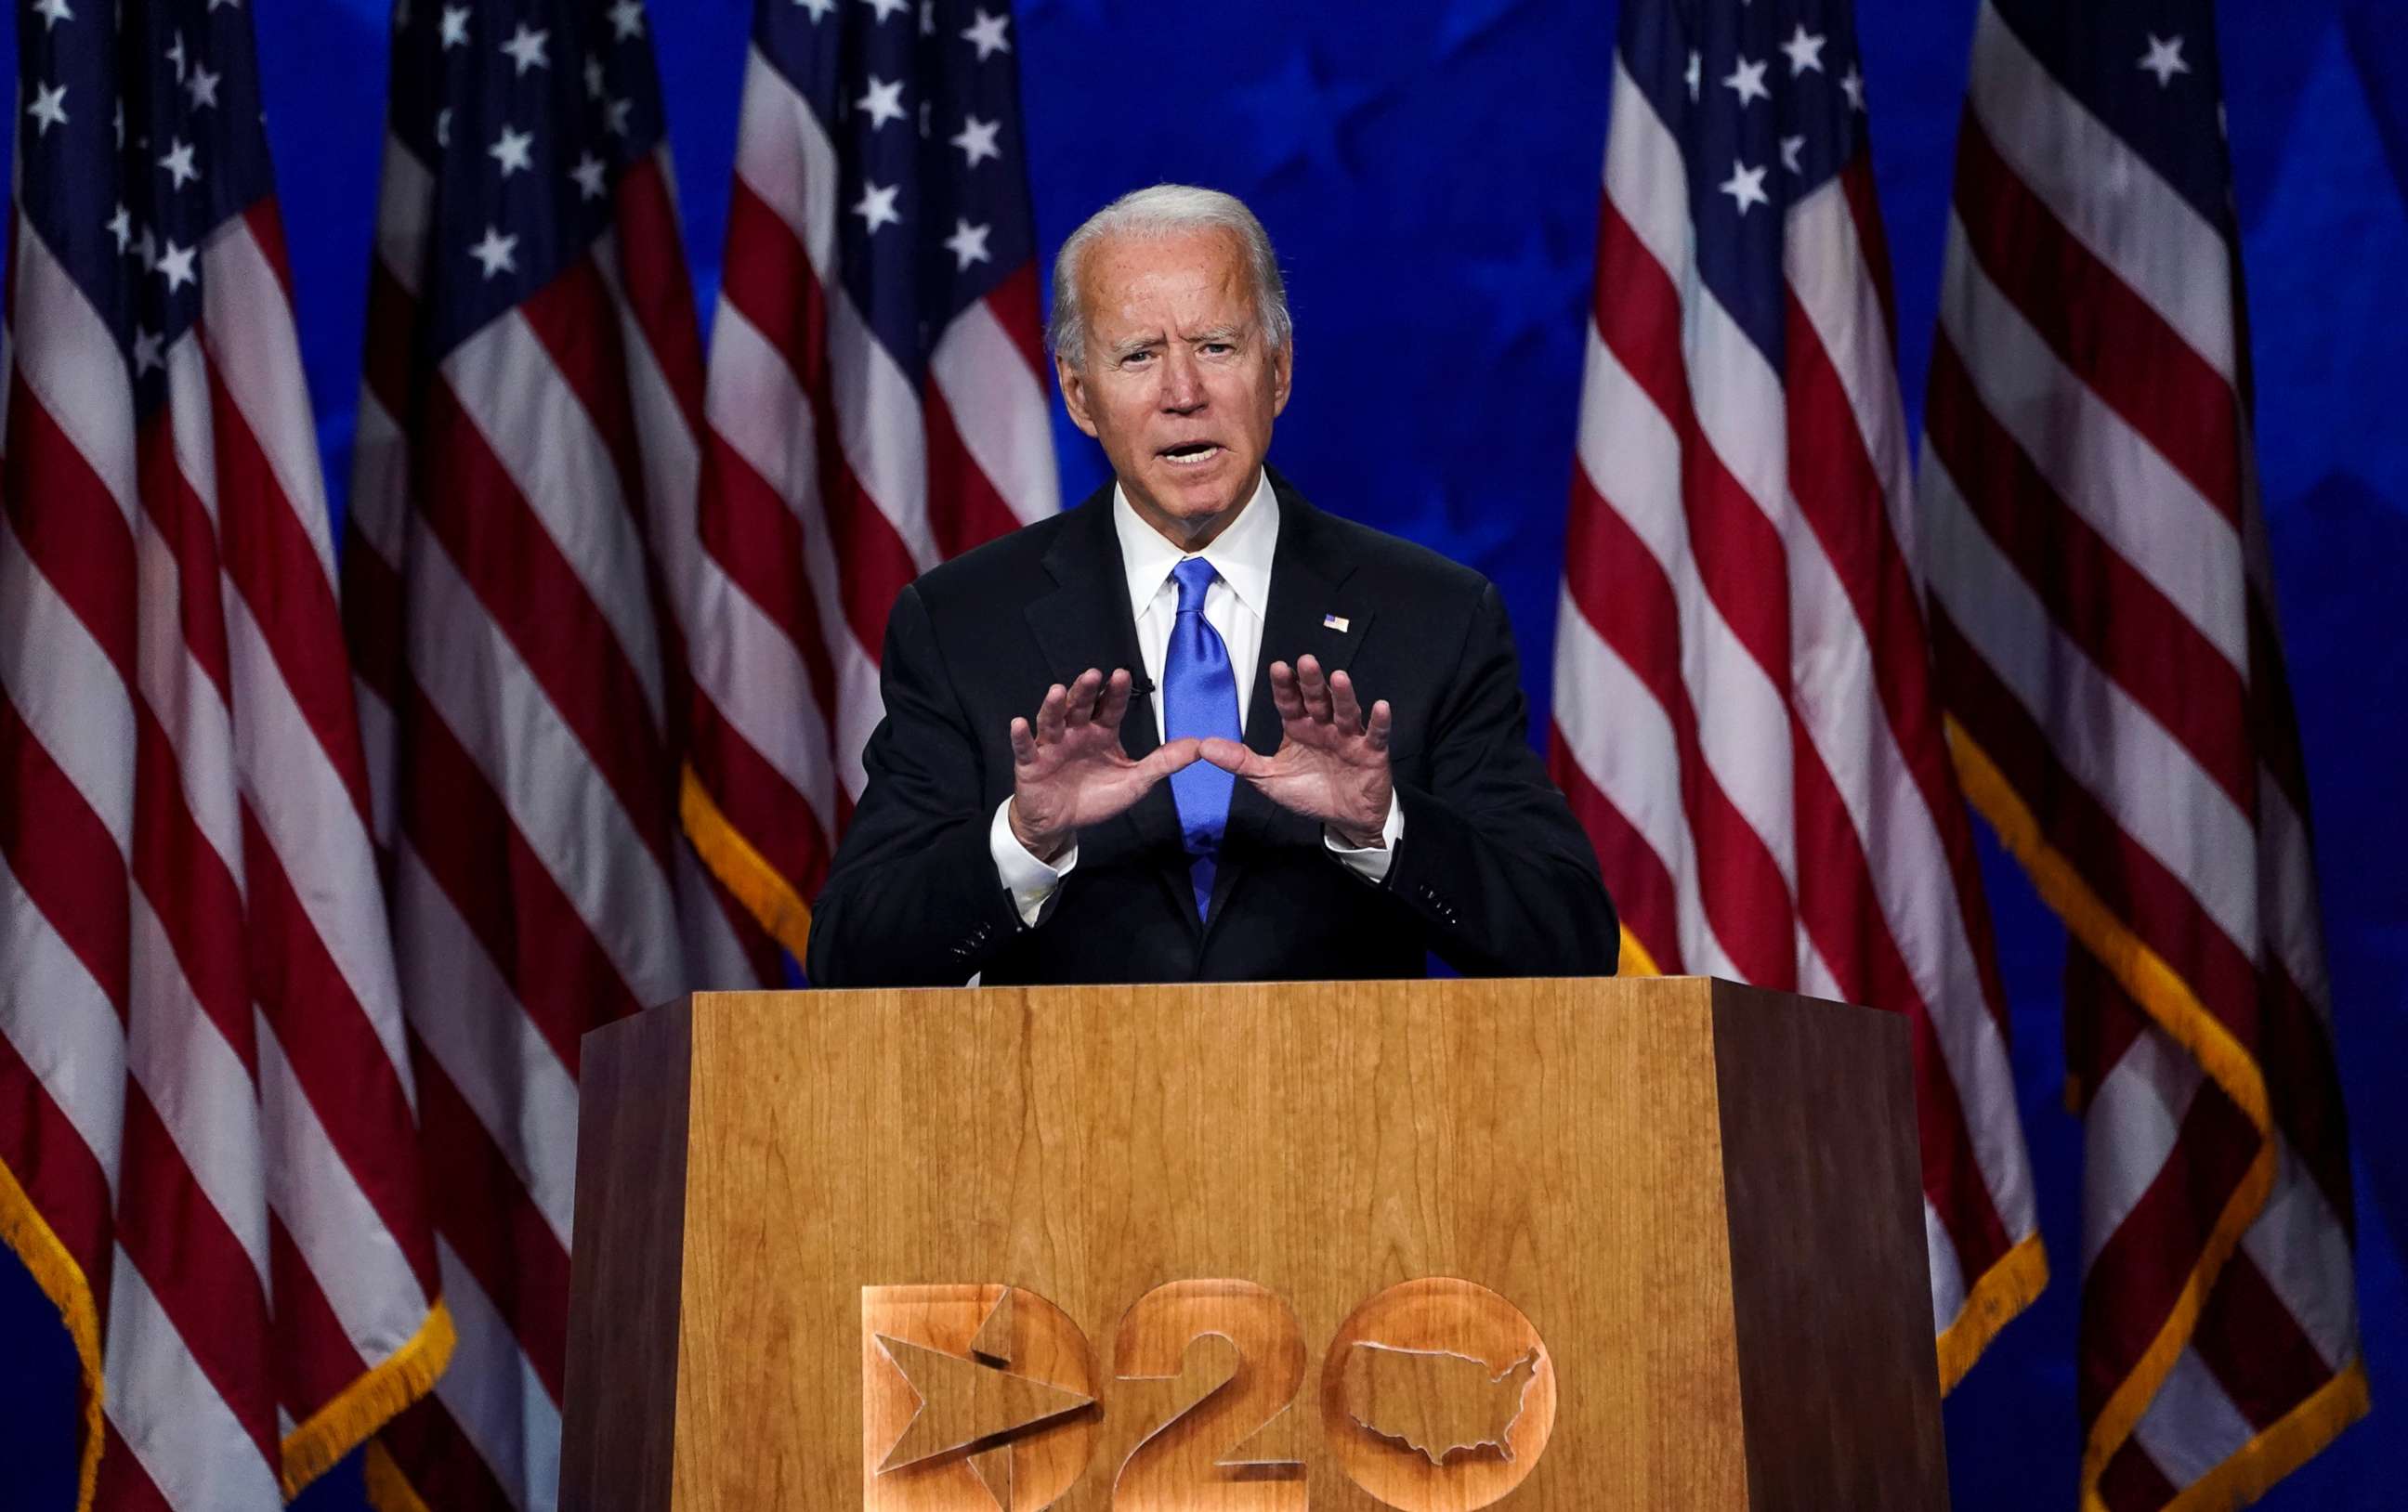 PHOTO: Former Vice President Joe Biden accepts the 2020 Democratic presidential nomination during a speech delivered for the largely virtual 2020 Democratic National Convention from the Chase Center in Wilmington, Del., Aug. 20, 2020.